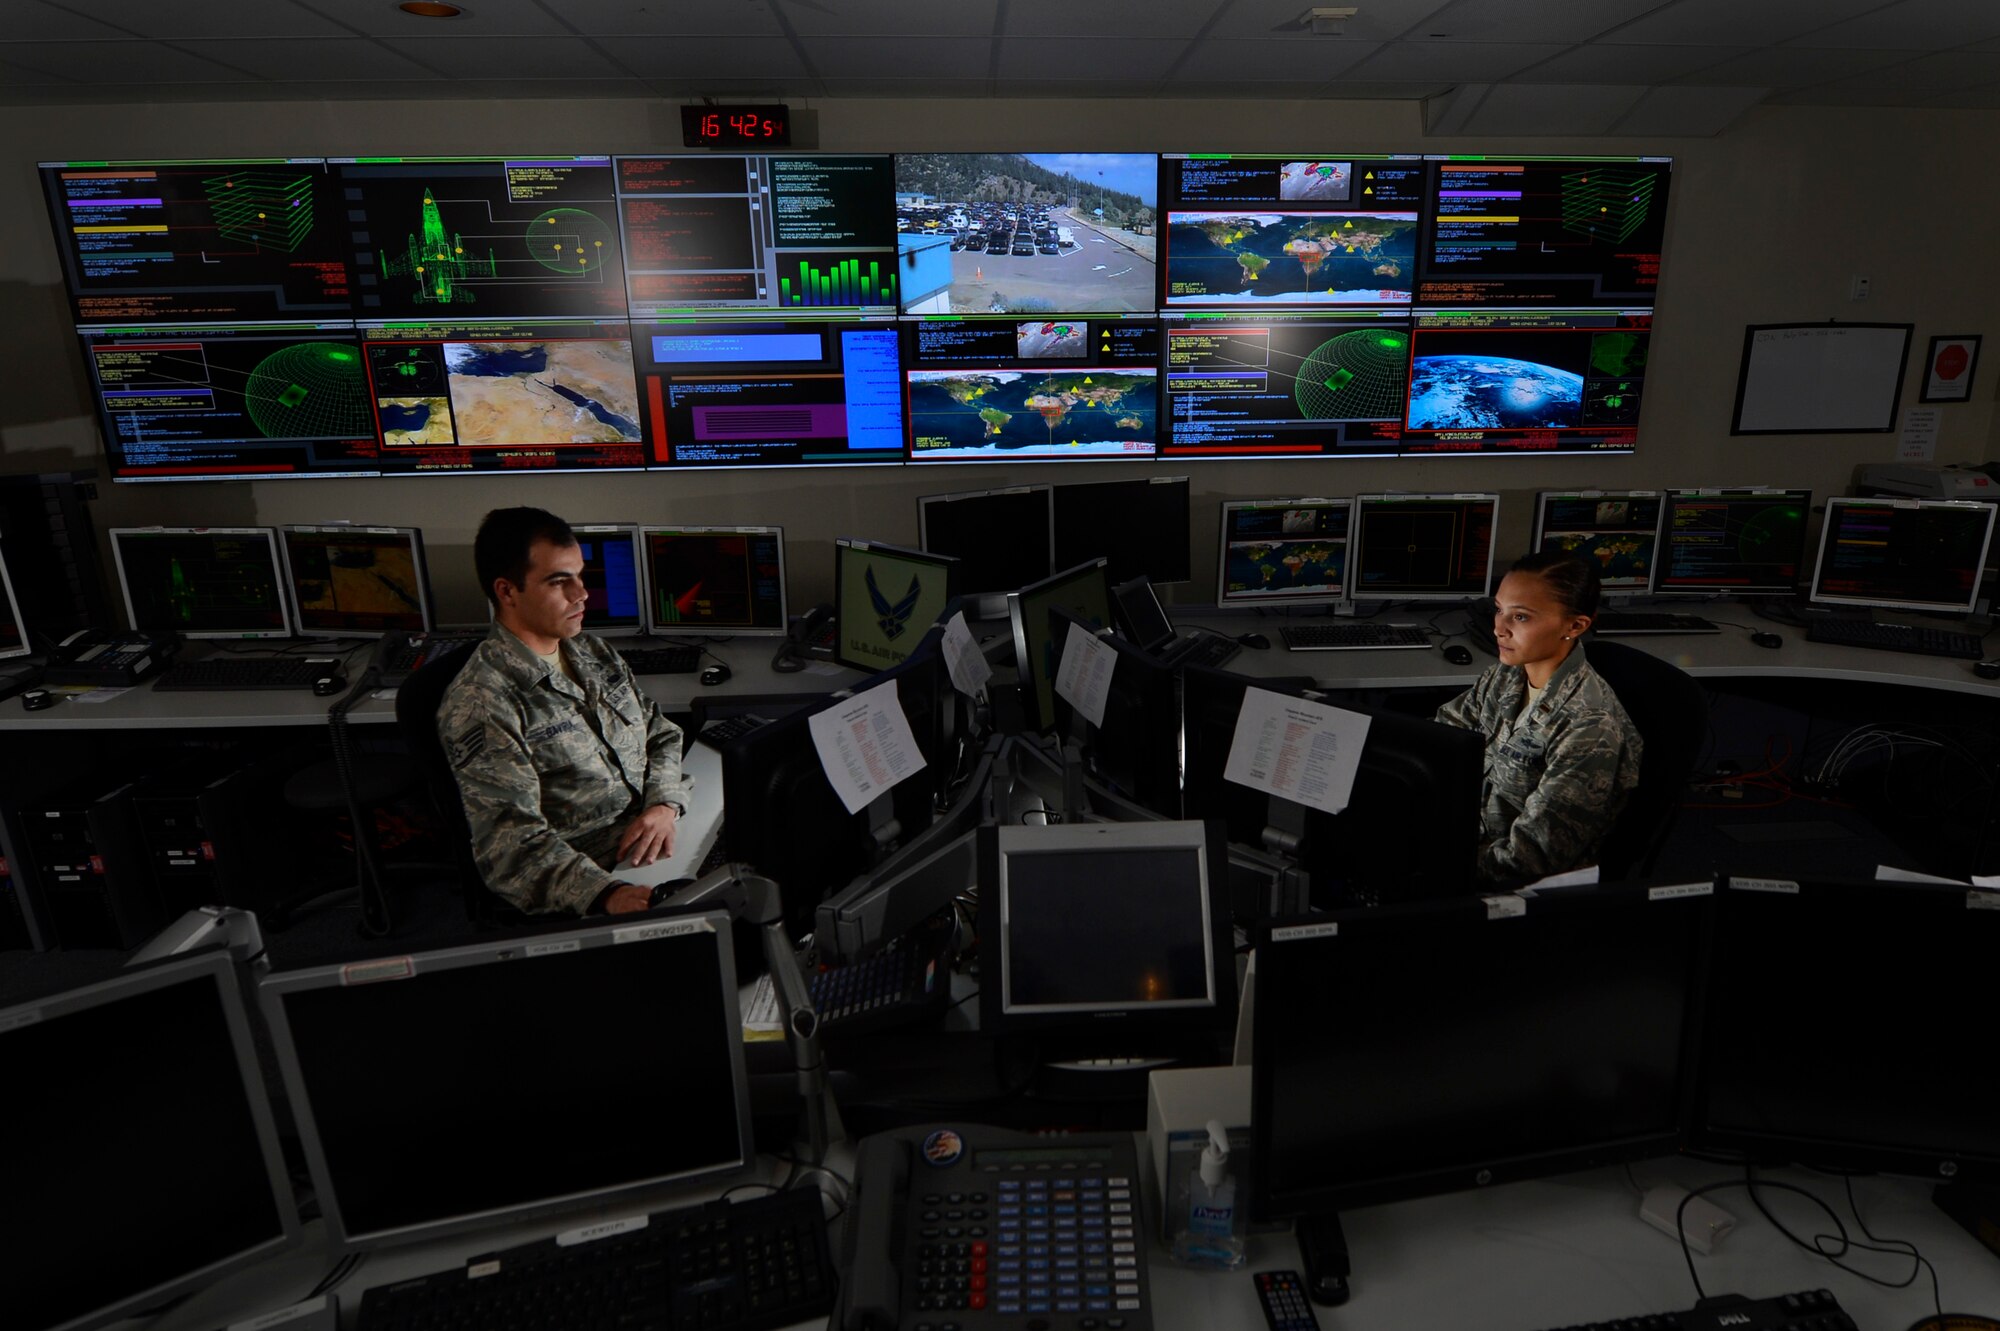 Staff Sgt. Alex Garviria, 721st Communication Squadron senior systems controller, and 2nd Lt. Rachel James, 721st CS crew commander, work in the Global Strategic Warning and Space Surveillance System Center at Cheyenne Mountain Air Force Station, Colo., Sept. 2, 2014. The 721st CS provides continuous monitoring of the strategic missile warning systems to ensure a constant dataflow of key information to North American Aerospace Defense Command (NORAD), U.S. Northern Command, U.S. Strategic Command, Air Force Space Command, Secretary of Defense, President of the United States, strategic, and theater commanders. (U.S. Air Force photo by Airman 1st Class Krystal Ardrey)